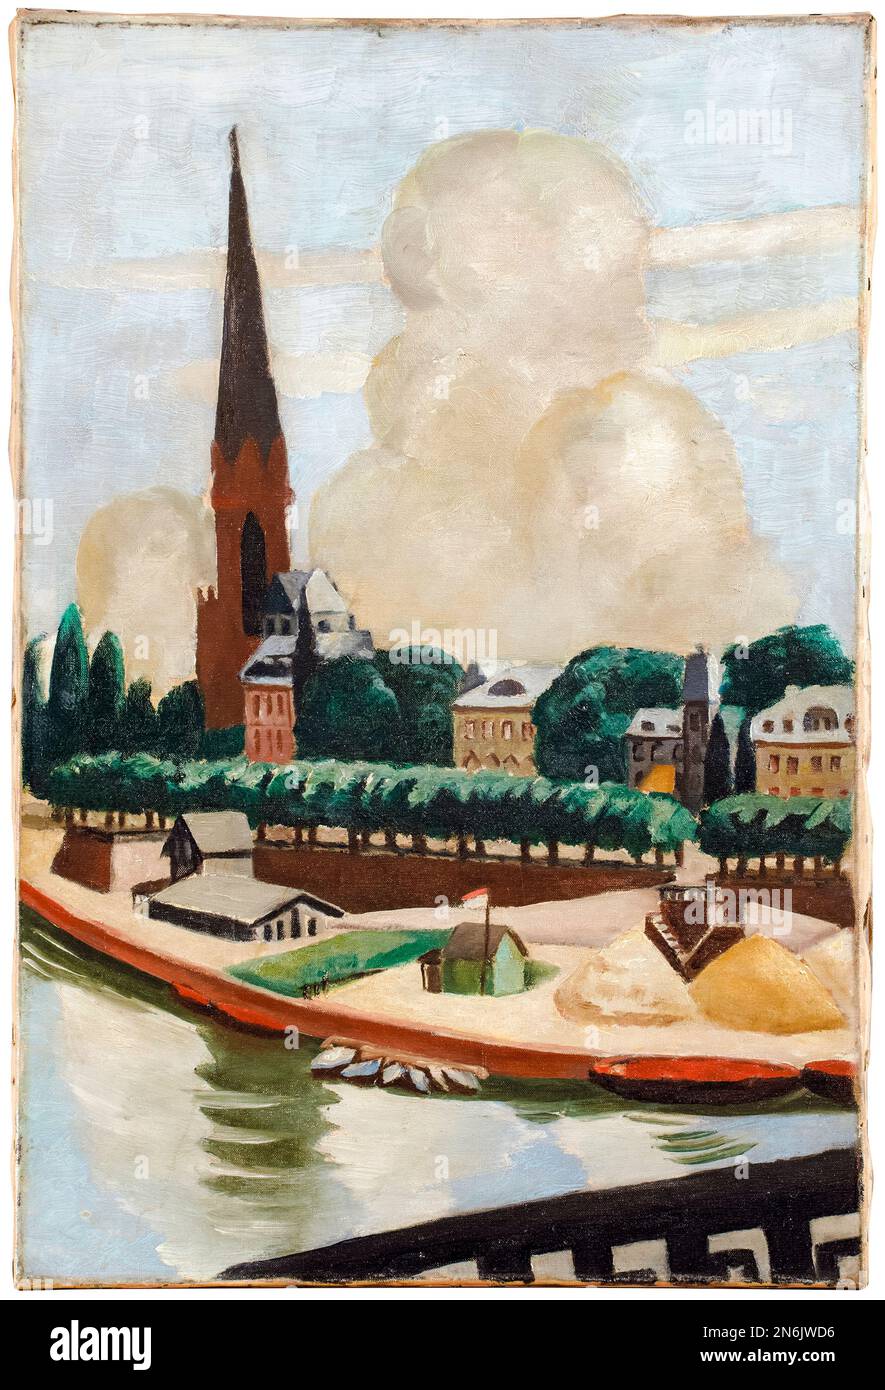 Max Beckmann, Bank of the Main and Church, landscape painting in oil on canvas, 1925 Stock Photo